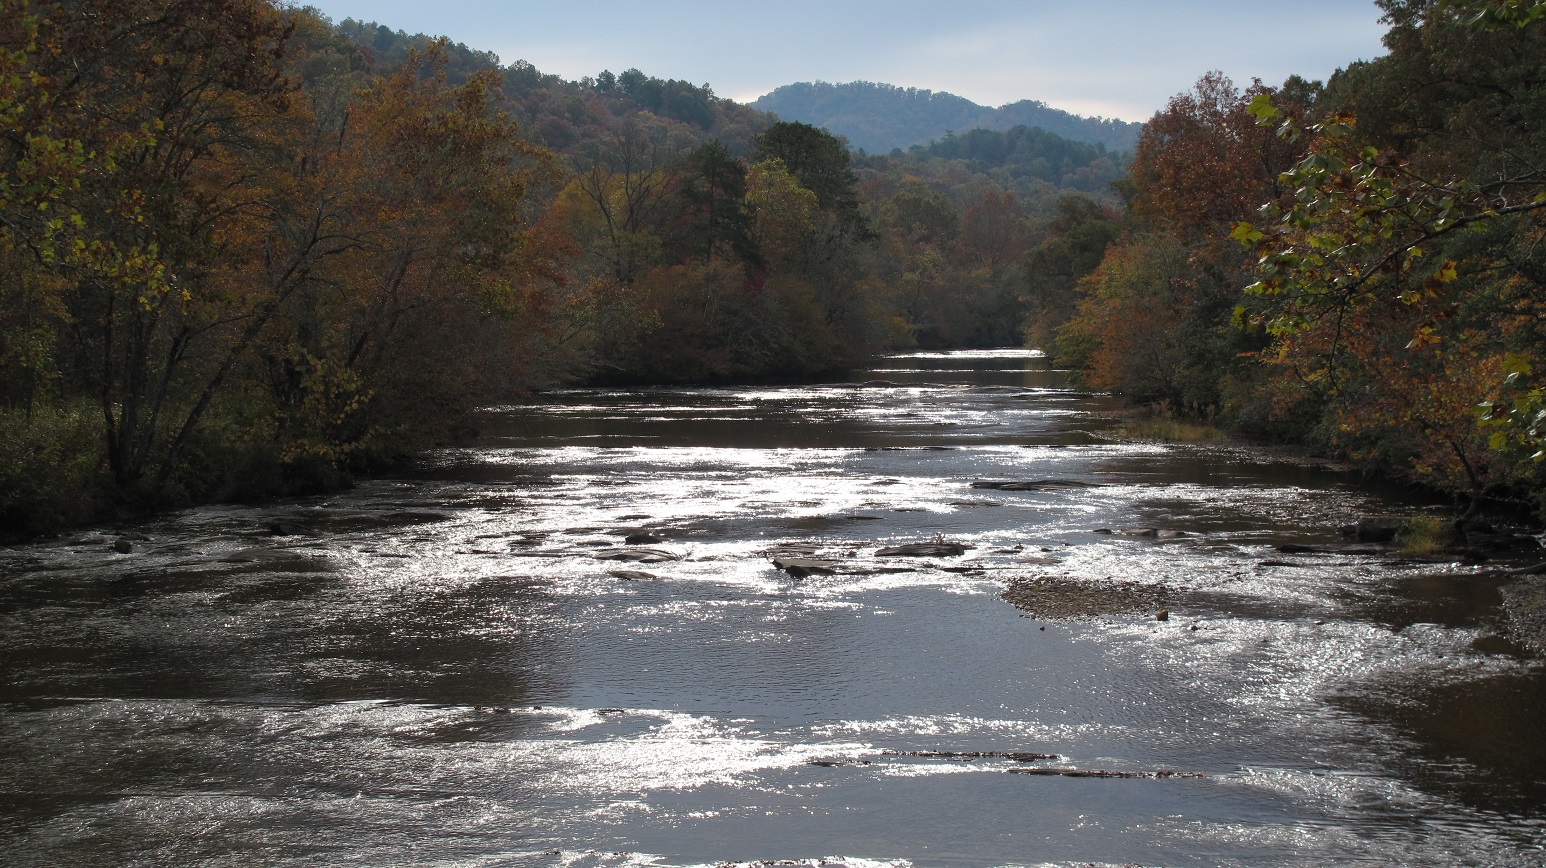 Photo of river lined with trees in the beginnings of fall color.